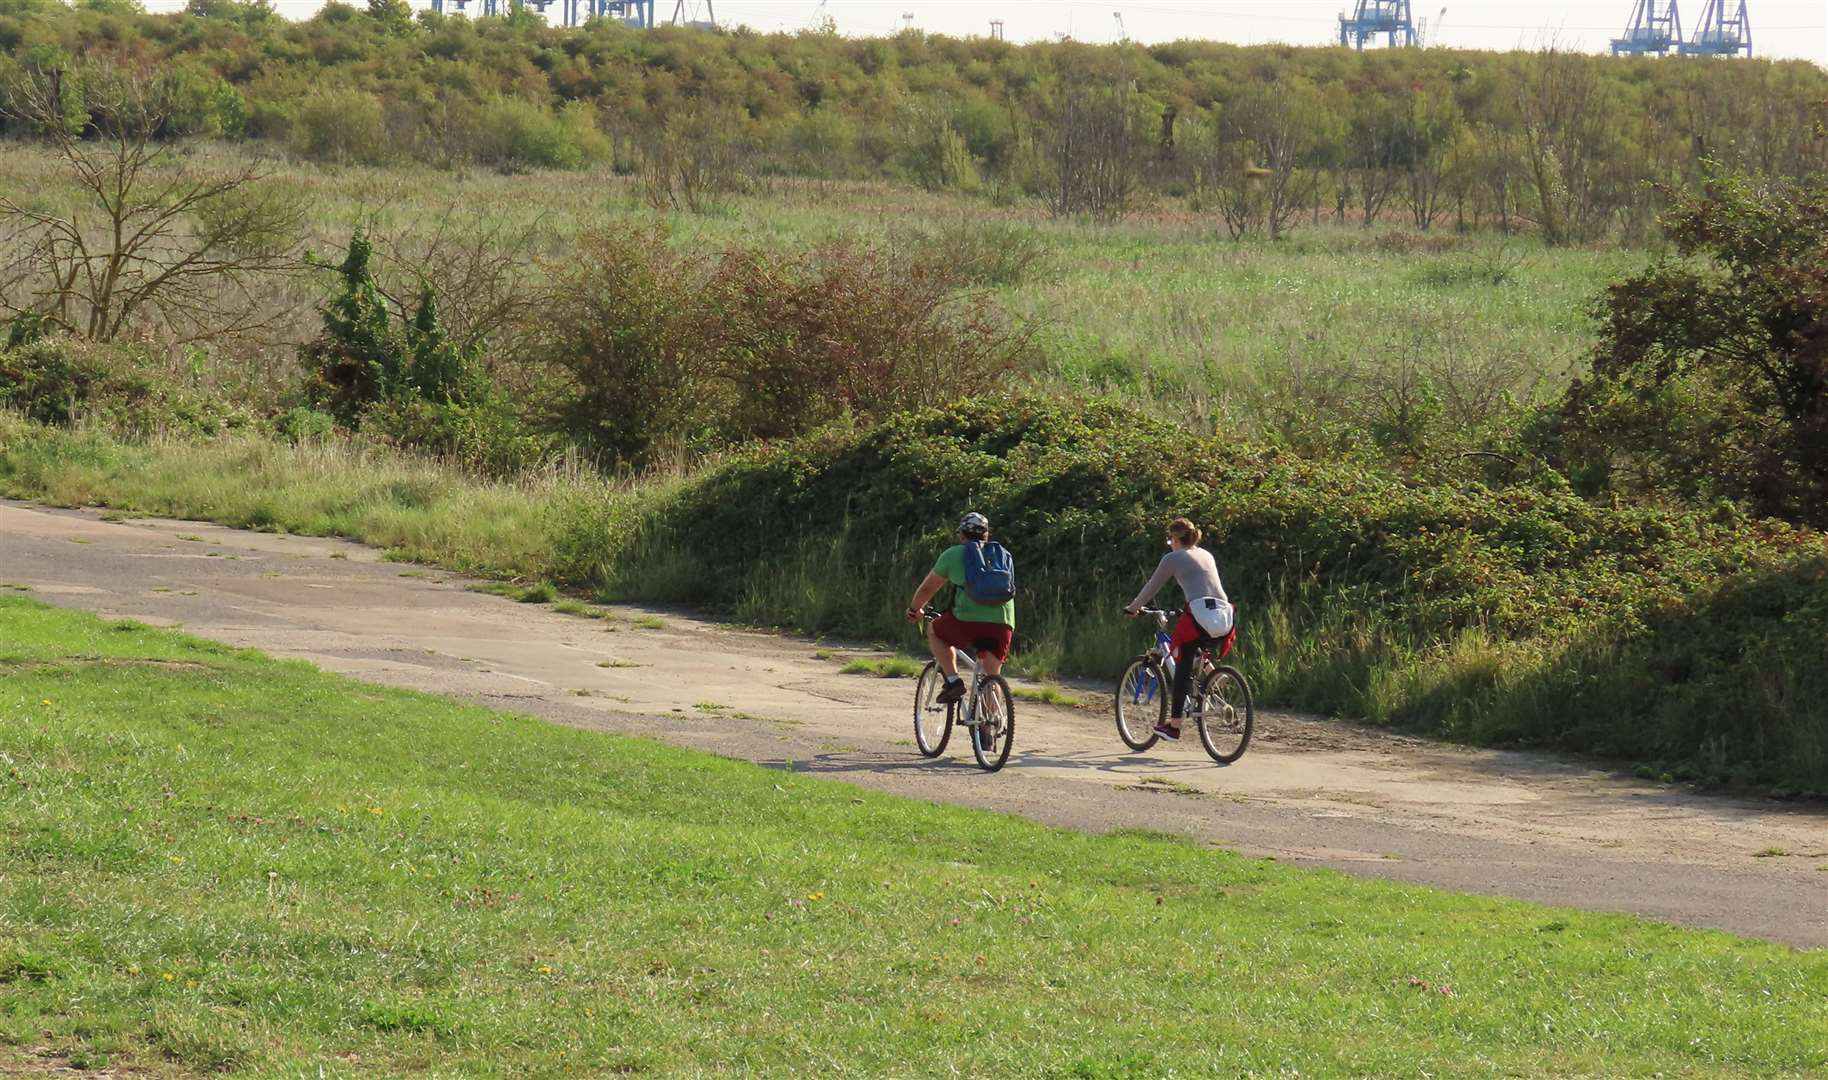 Cycling at the Swanscombe Peninsula. Photo: Donna Zimmer